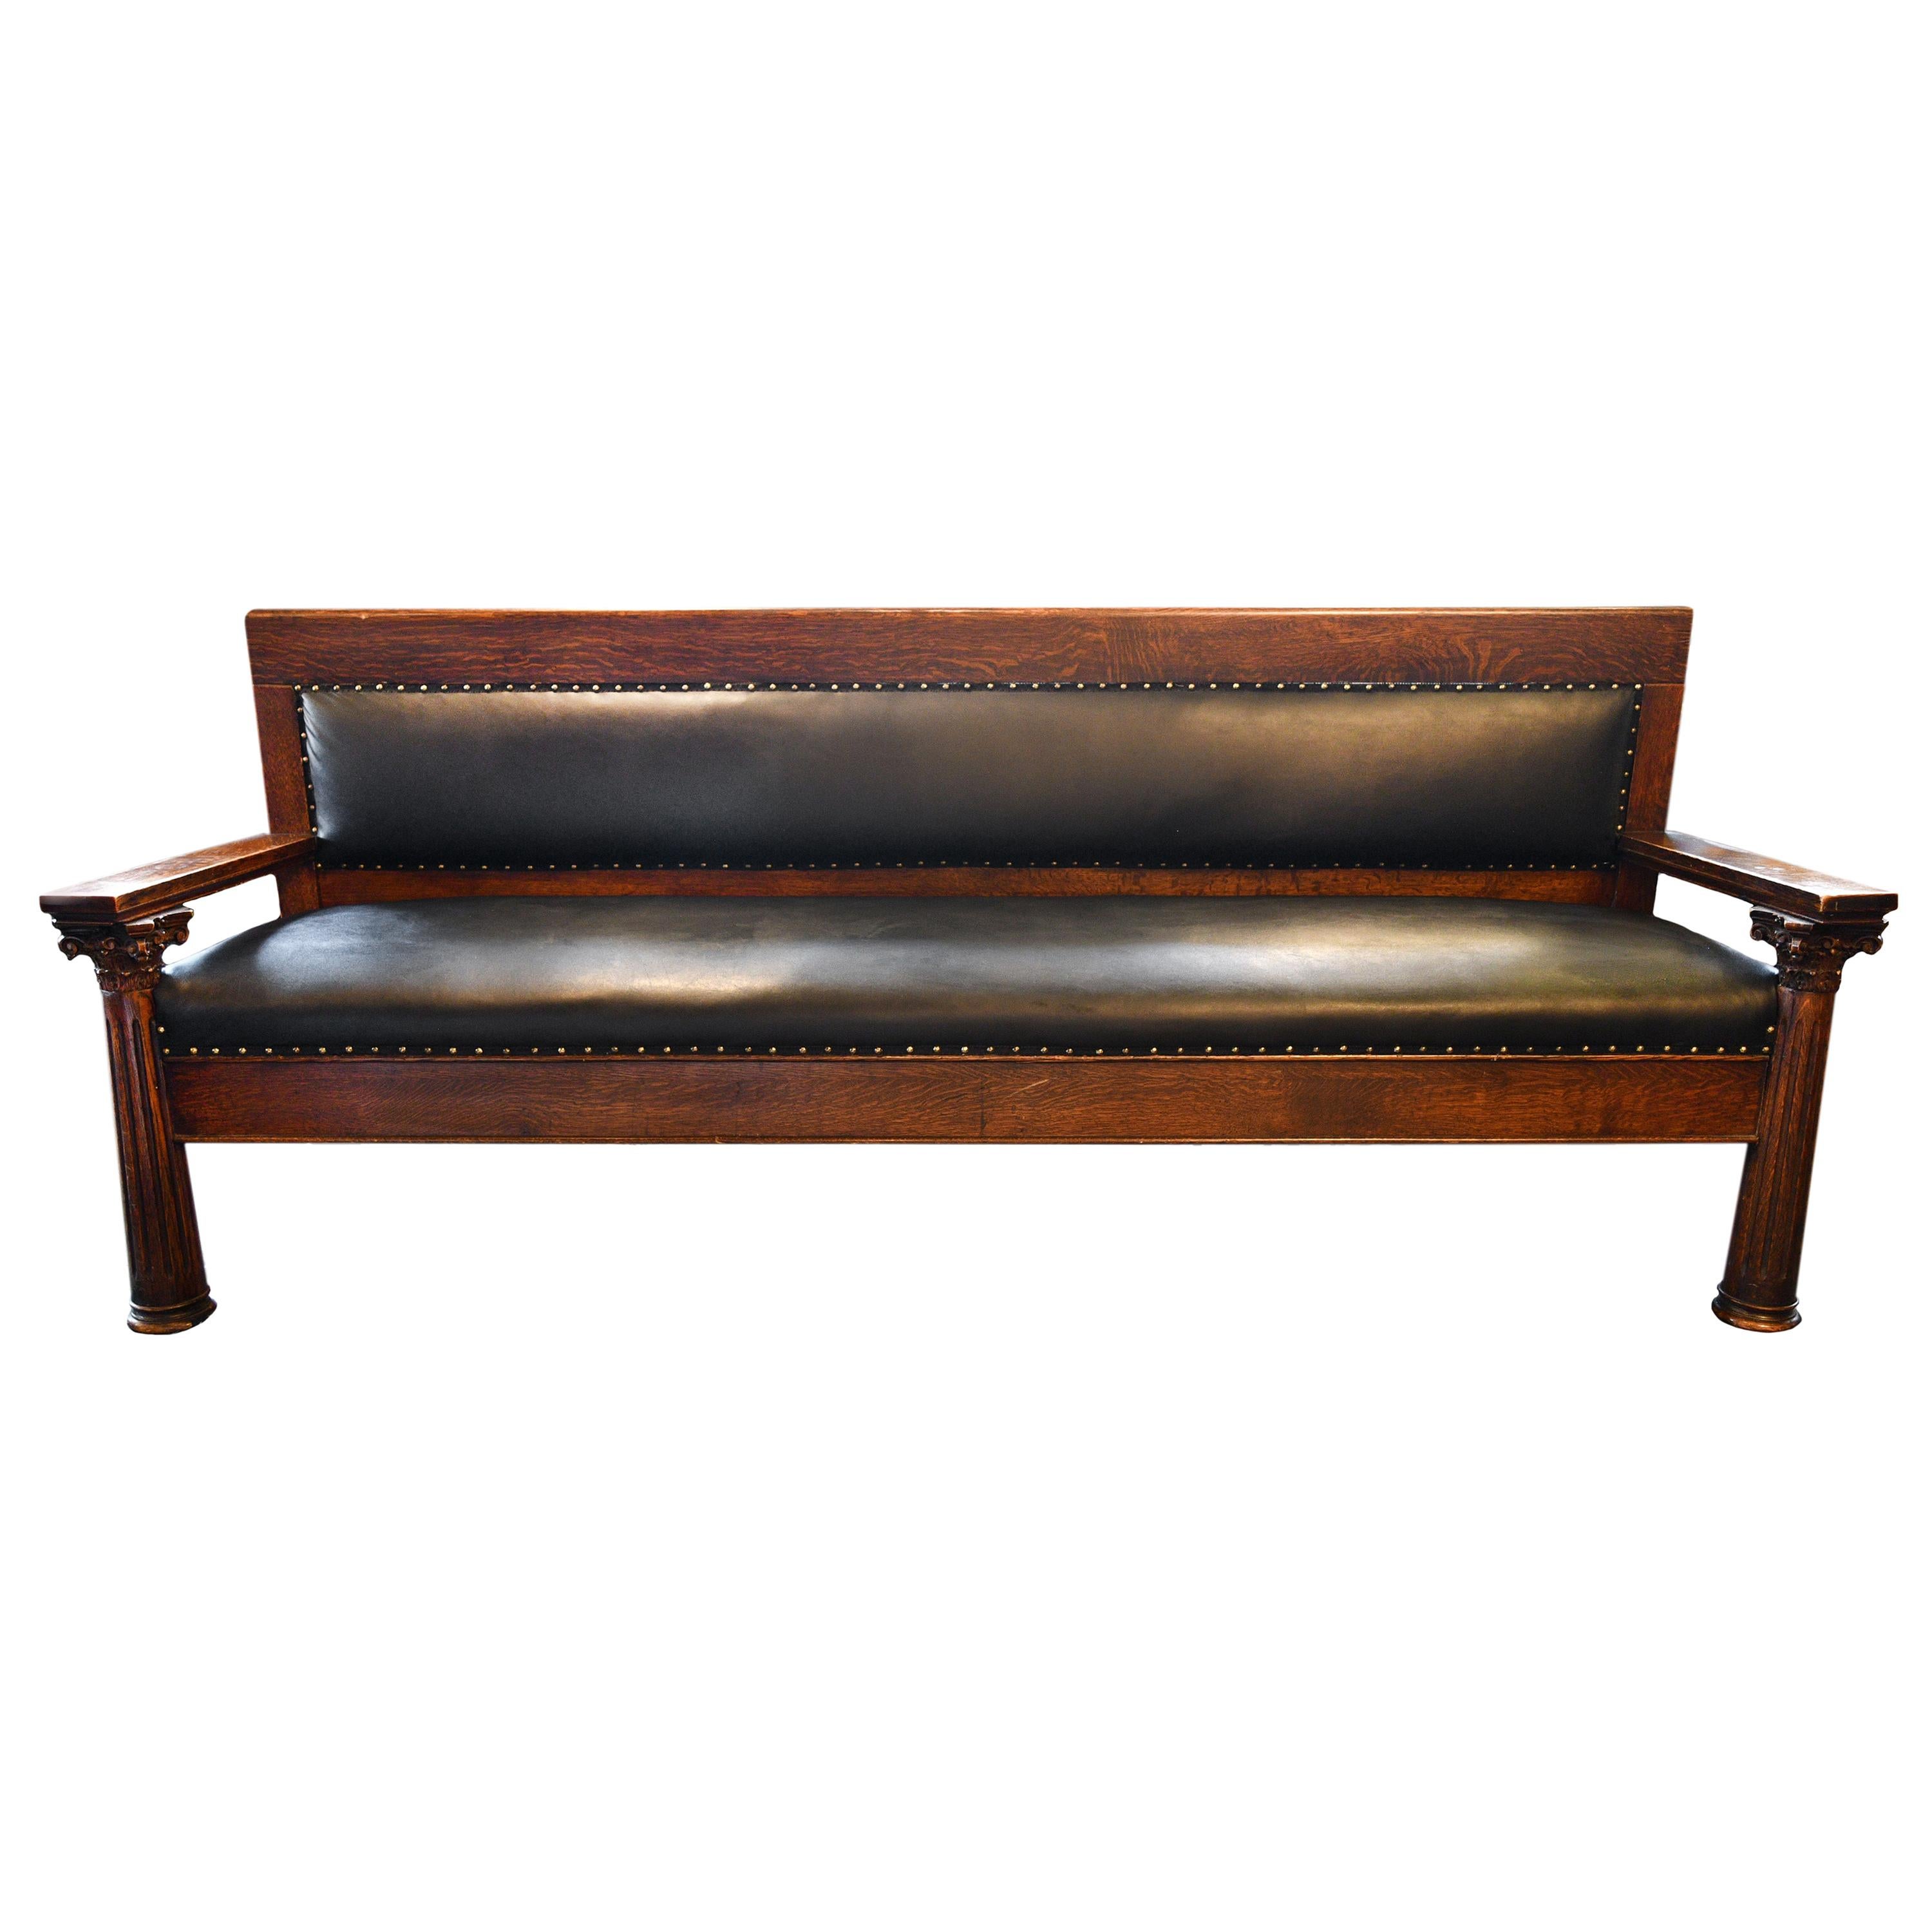 Masonic Lodge Hand Carved Oak Upholstered Bench with Columns